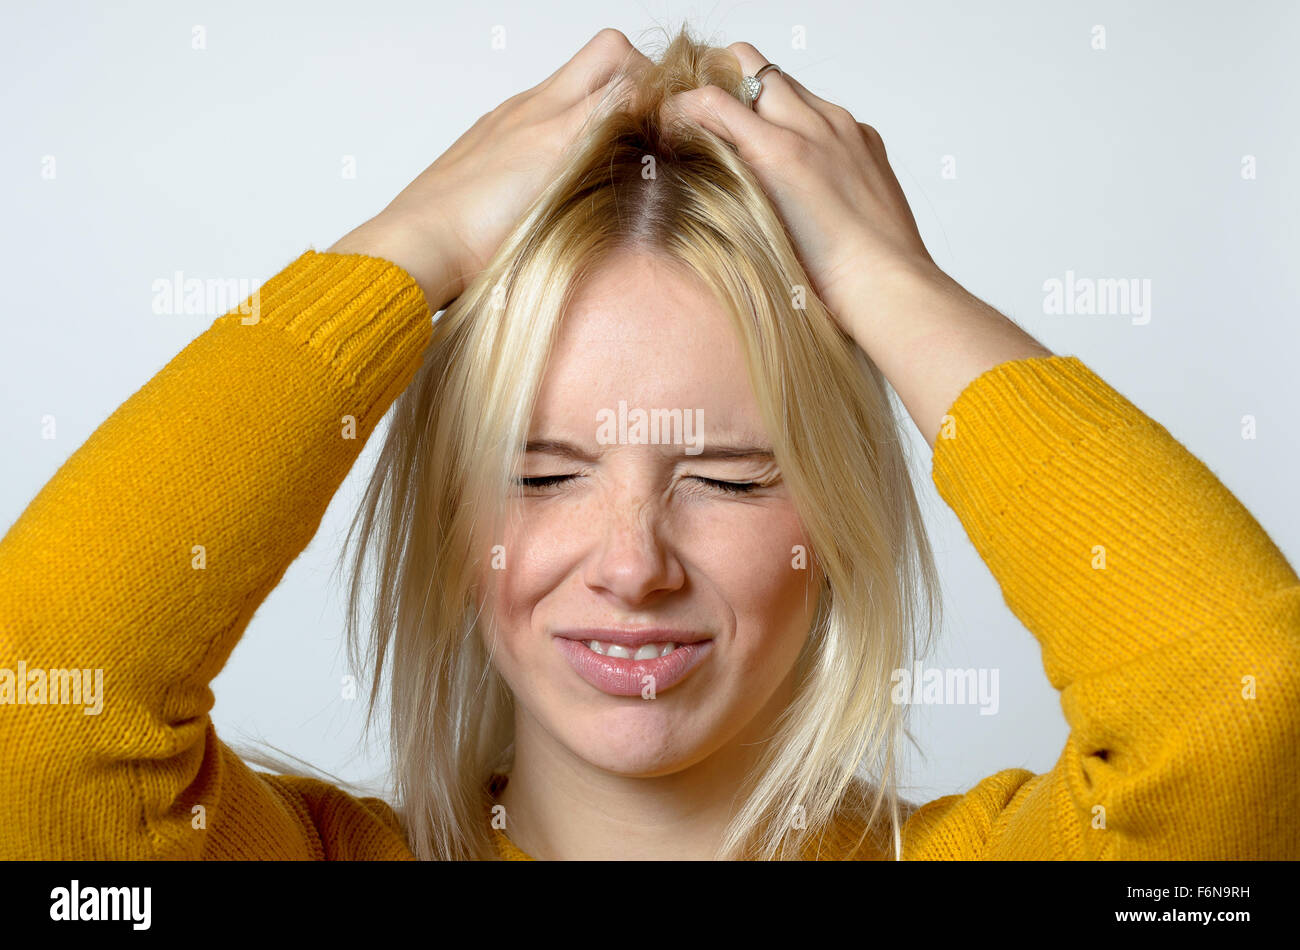 Close up Young Woman Scratching her Head Using Two Hands, Showing Disgusted Facial Expression, Against Light Gray Background. Stock Photo